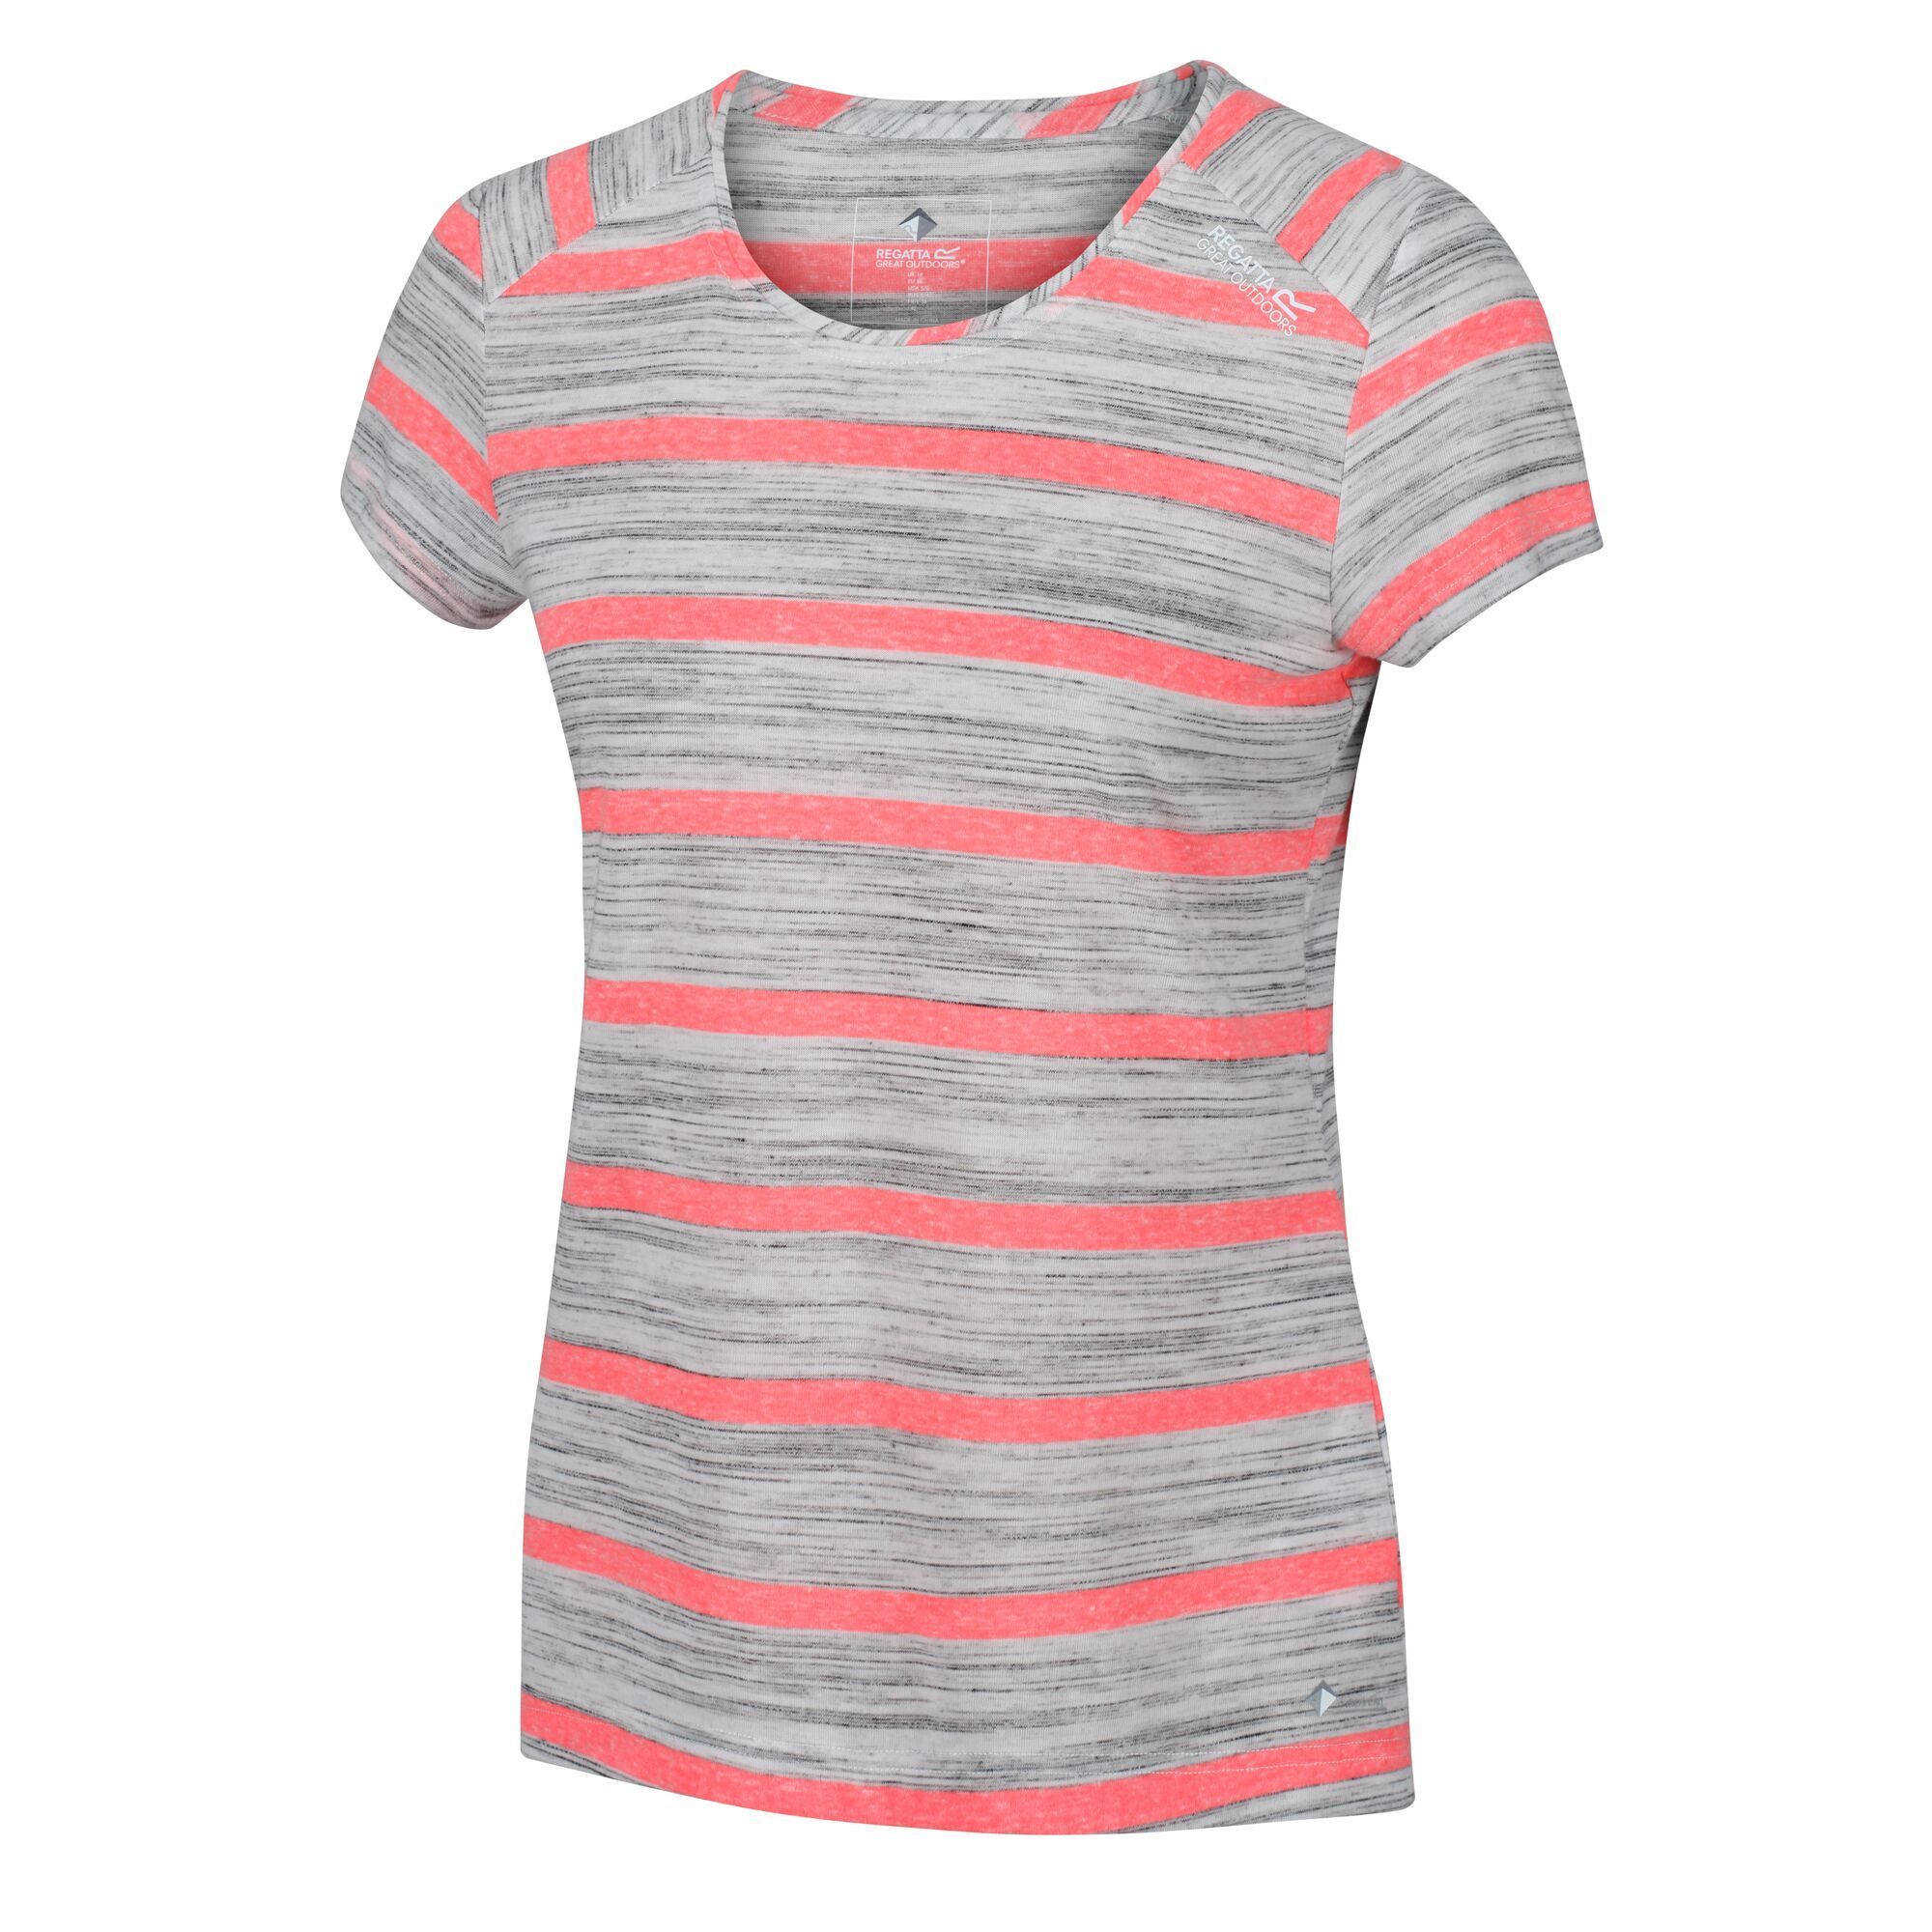 Material: 90% polyester, 7% cotton, 3% viscose/rayon. Good wicking performance. Semi-sheer stripes. Cap sleeves.